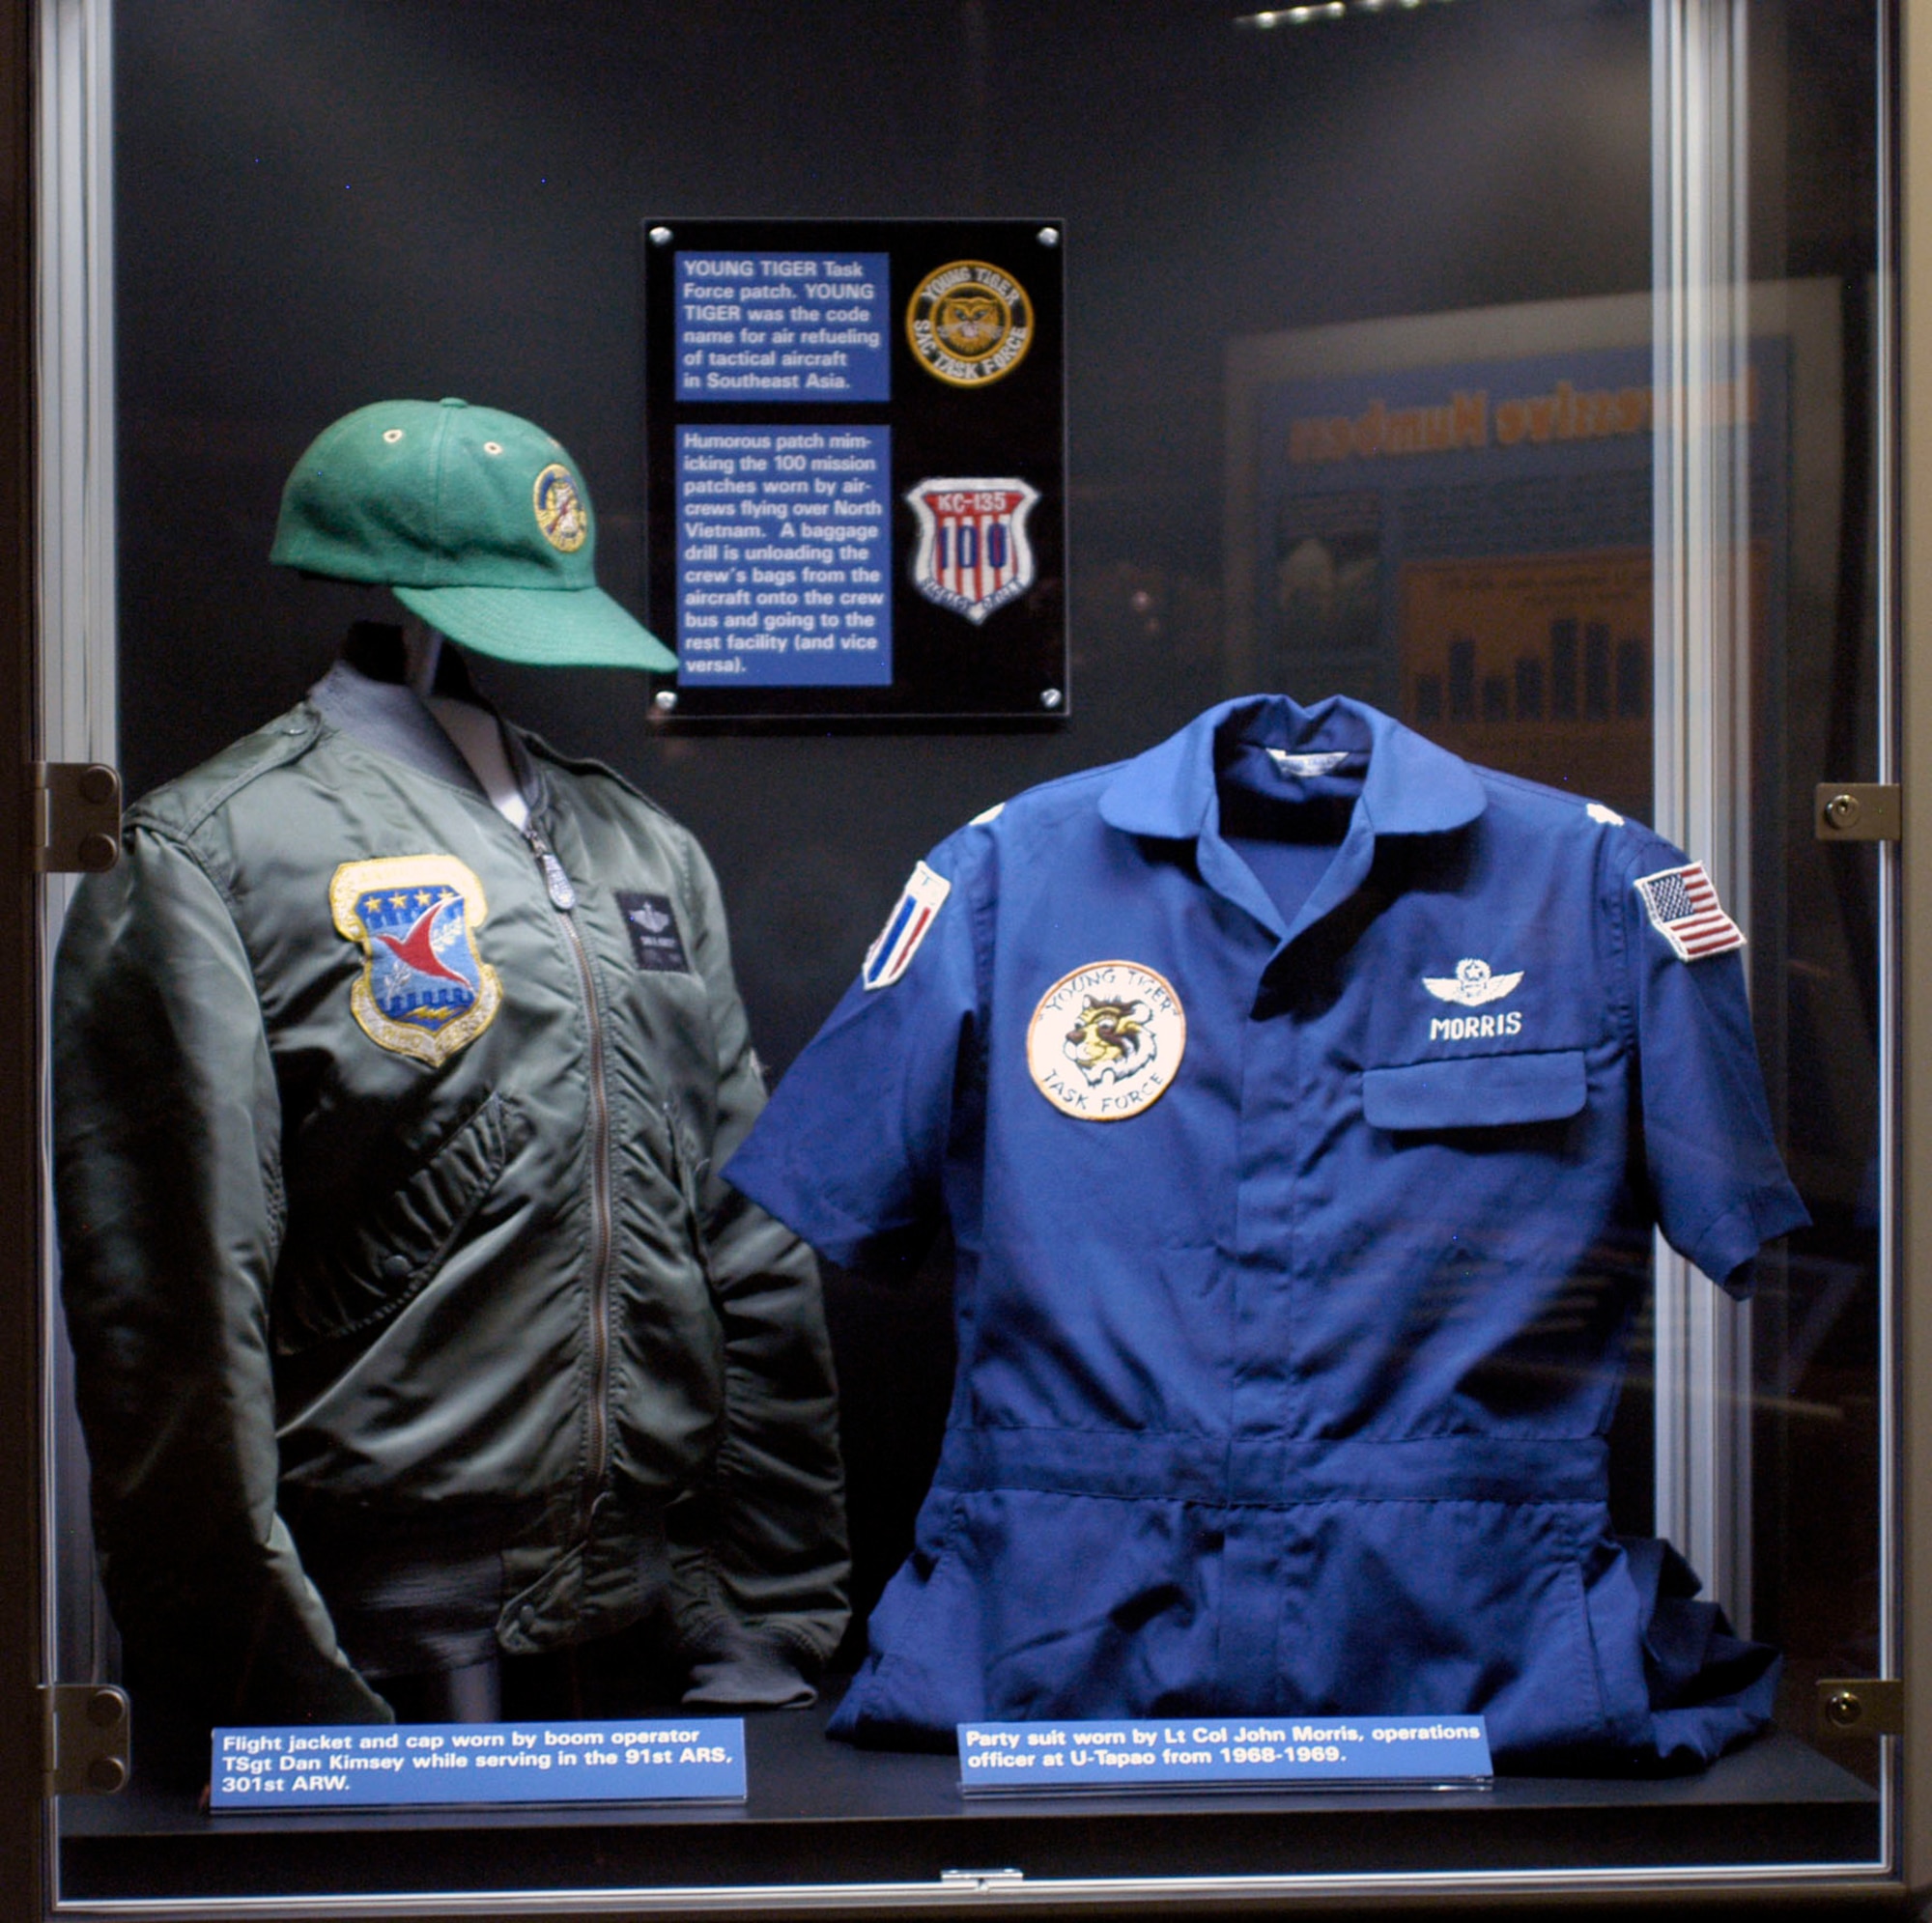 DAYTON, Ohio -- The "Tankers at War: Air Refueling in Southeast Asia" exhibit in the Southeast Asia War Gallery at the National Museum of the U.S. Air Force includes a flight jacket and cap worn by boom operator Tech. Sgt. Dan Kimsey, who served with the 91st Air Refueling Squadron, as well as a party suit worn by Lt. Col. John Morris, the operations officer at U-Tapao from 1968-1969. (U.S. Air Force photo)